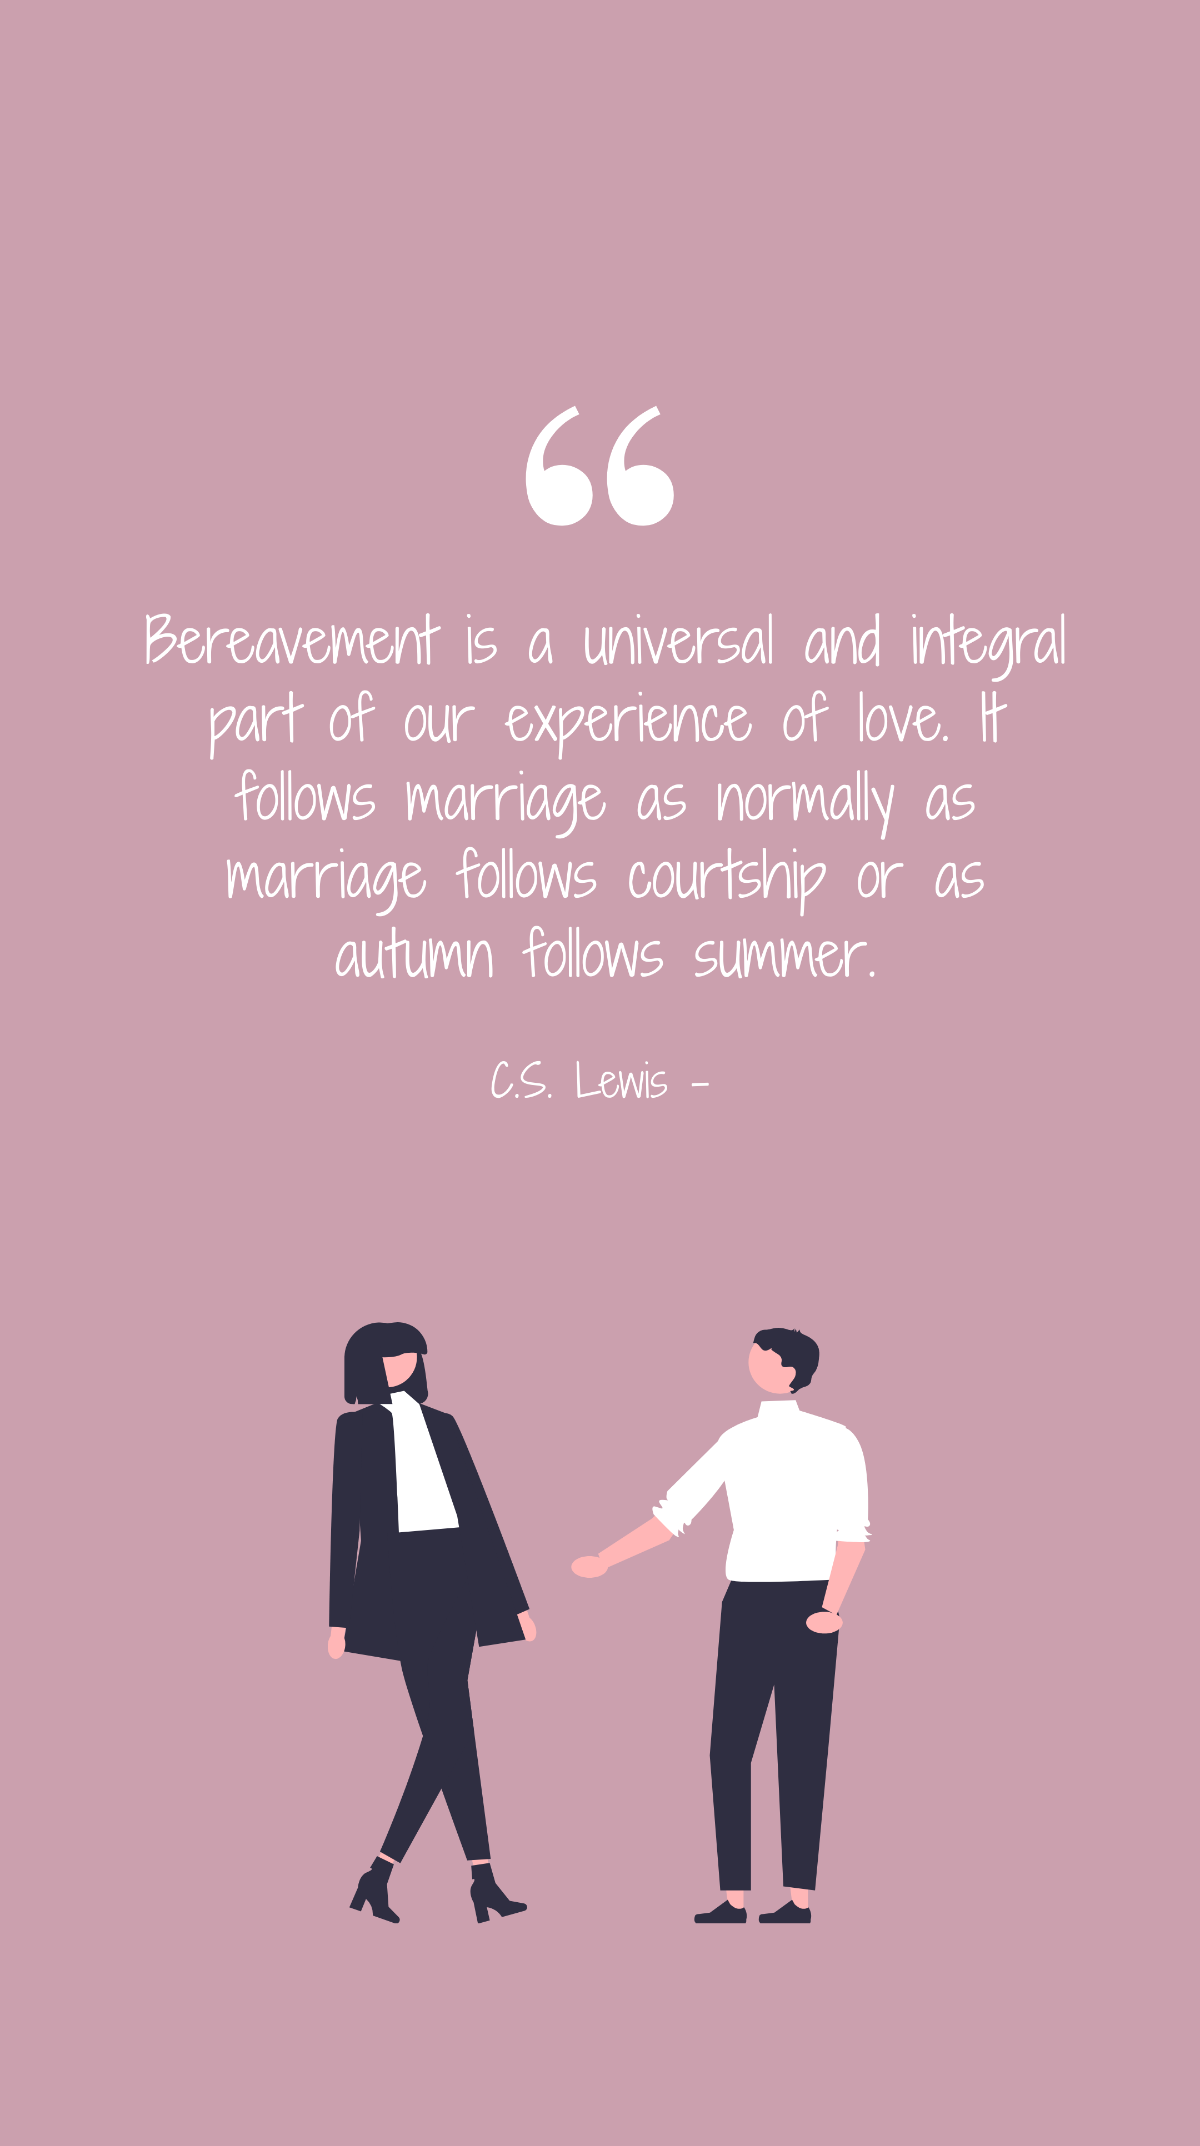 Free C.S. Lewis - Bereavement is a universal and integral part of our experience of love. It follows marriage as normally as marriage follows courtship or as autumn follows summer. Template